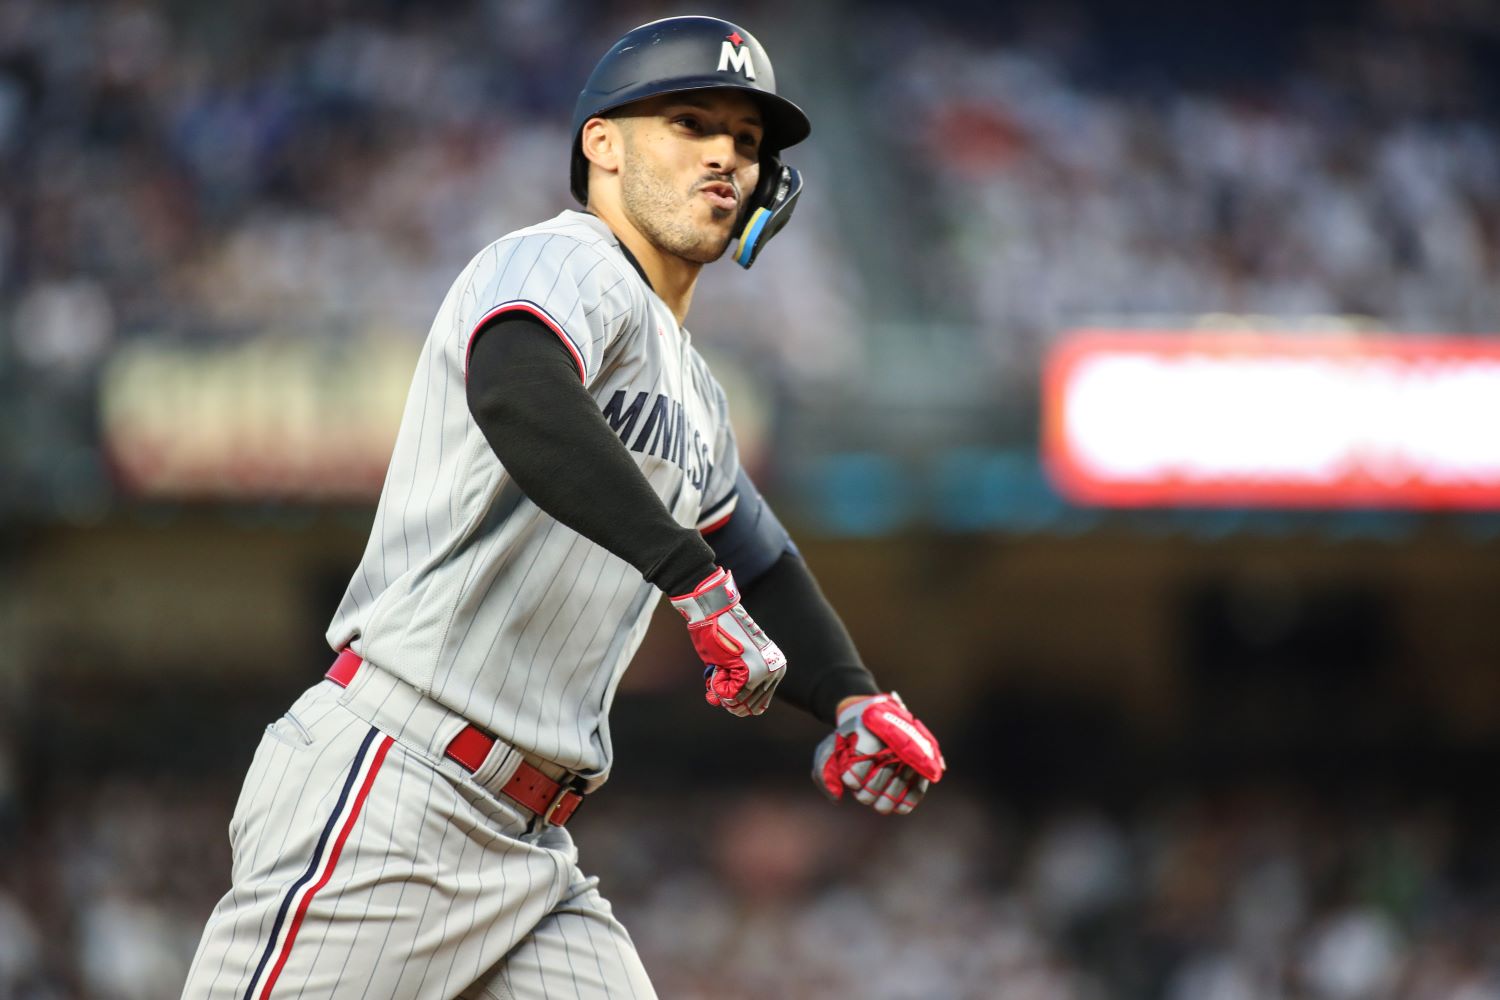 MLB TV viewers left in shock at 'embarrassing' Giancarlo Stanton